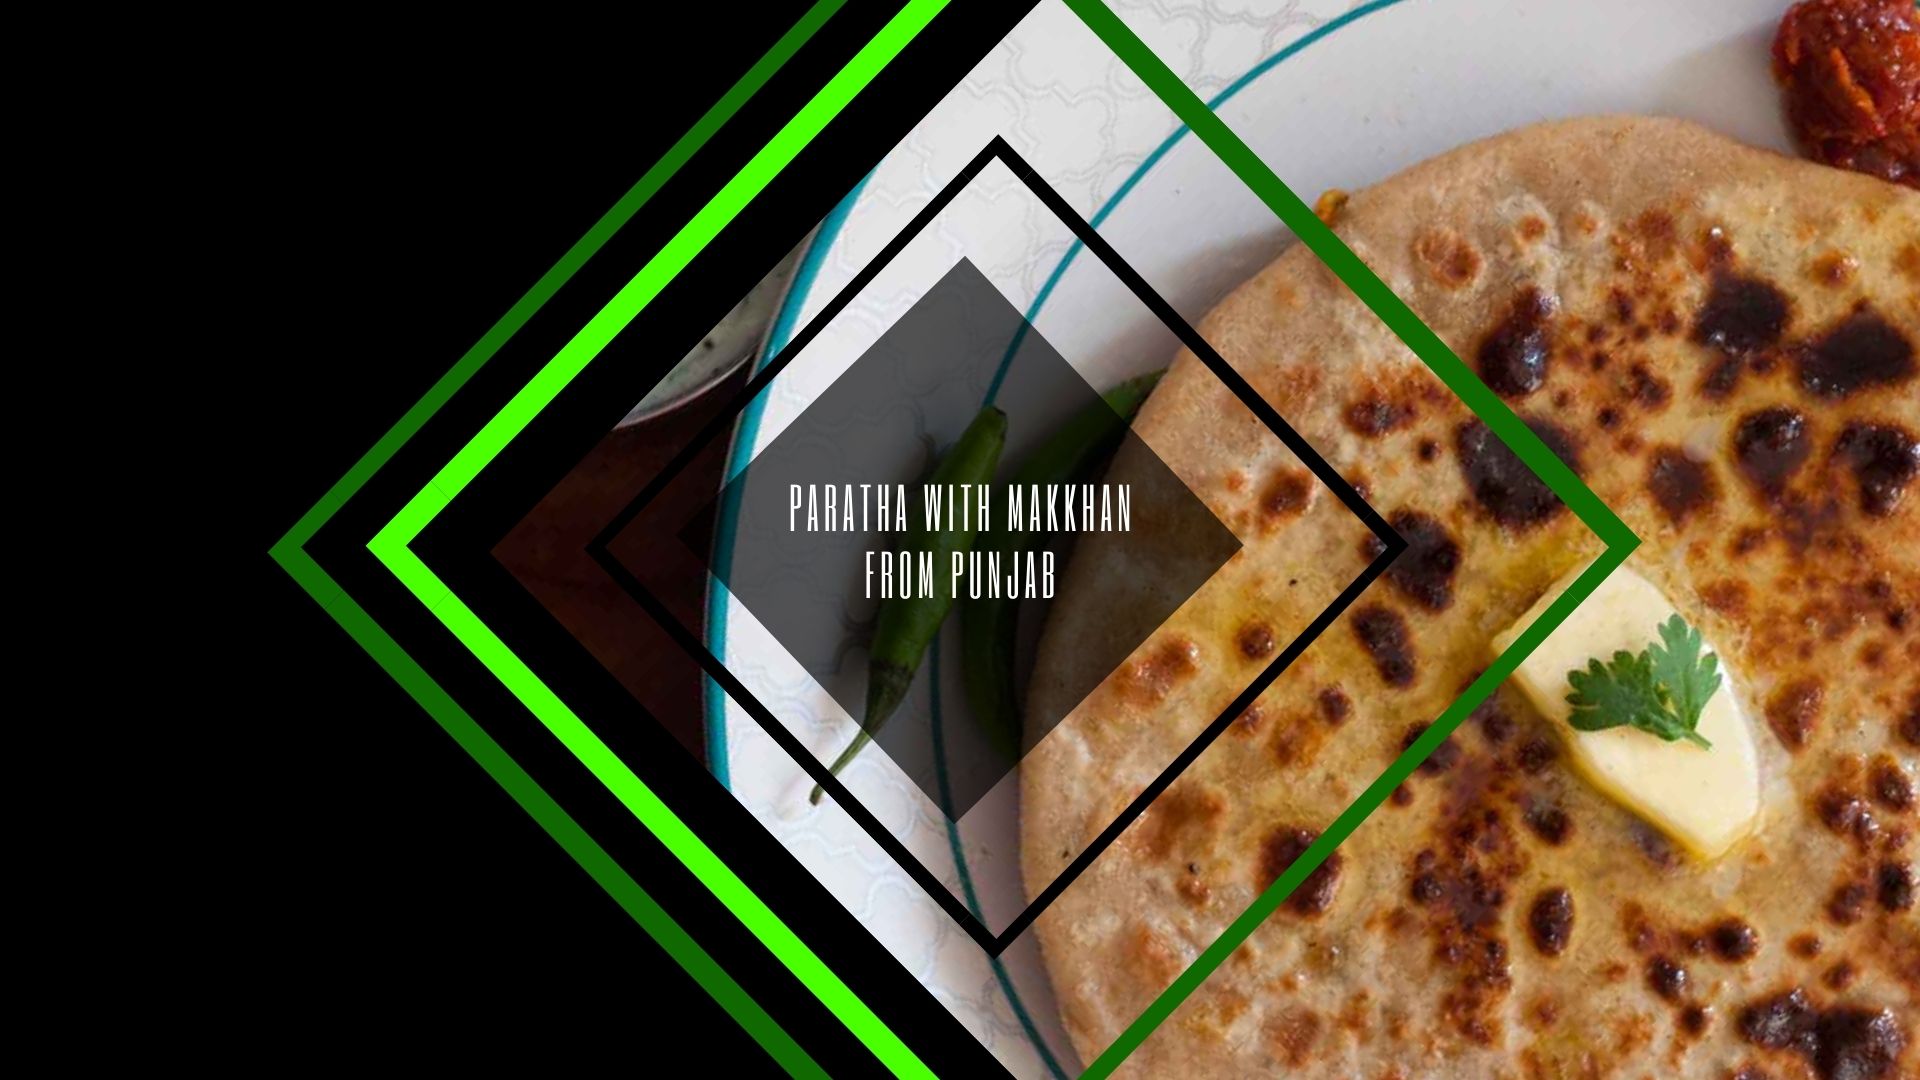 Recipes for pregnancy - Paratha with Makkhan from Punjab